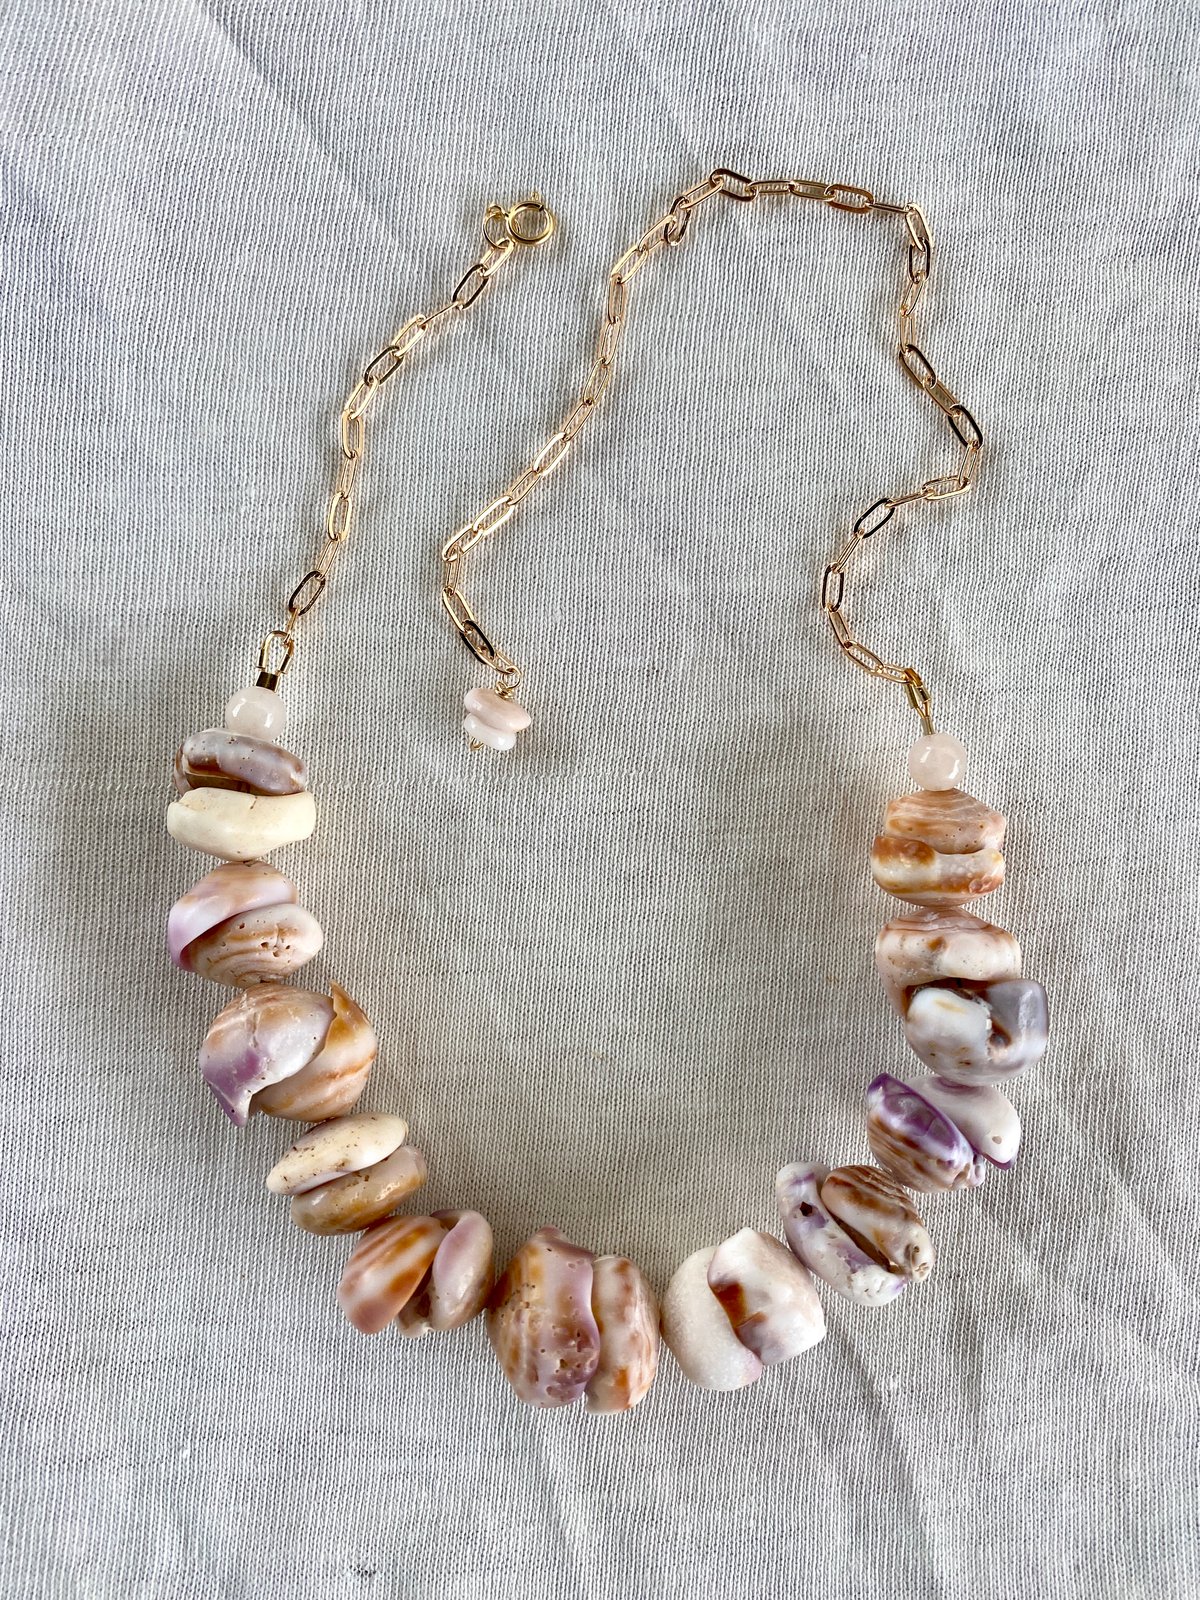 Braw Puka Shell Necklace for Women Handmade Clam Chips India | Ubuy